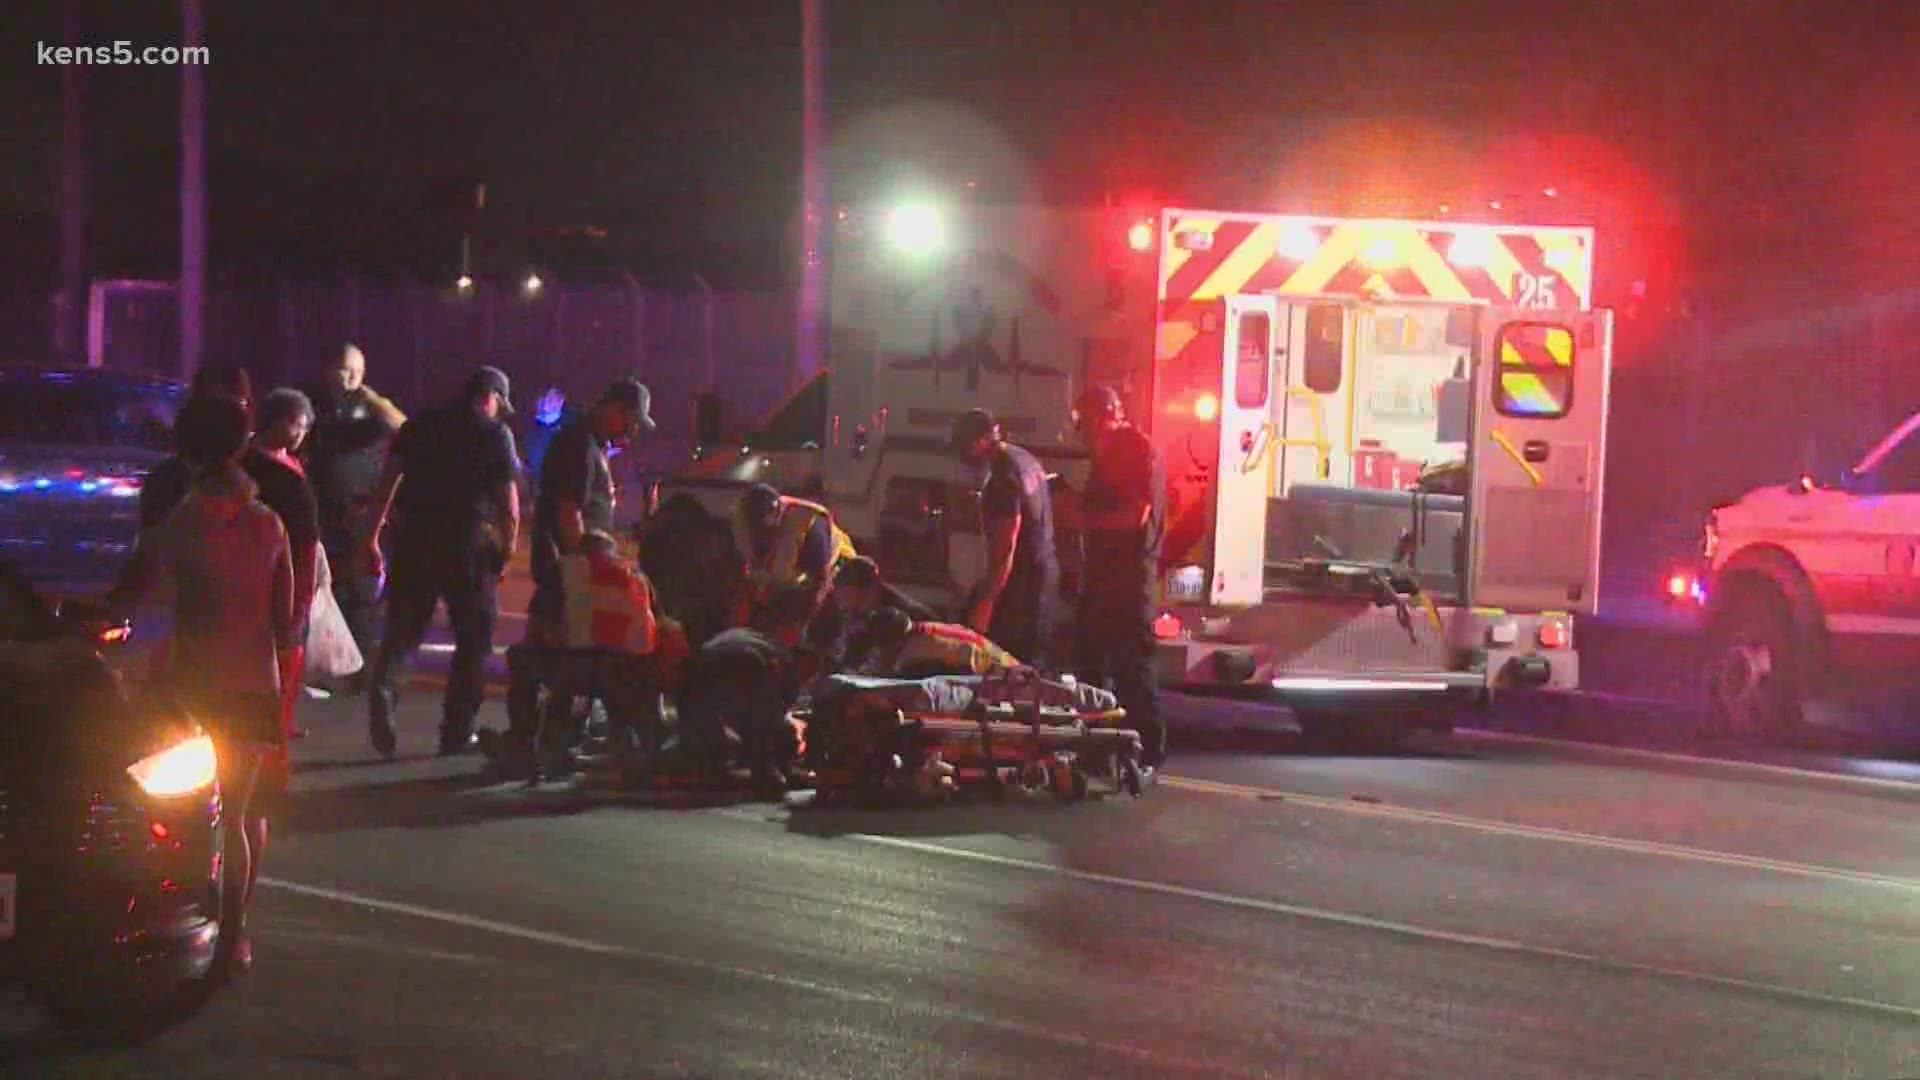 First responders tried to save a man who was hit by a truck Friday night, but he died at the scene.